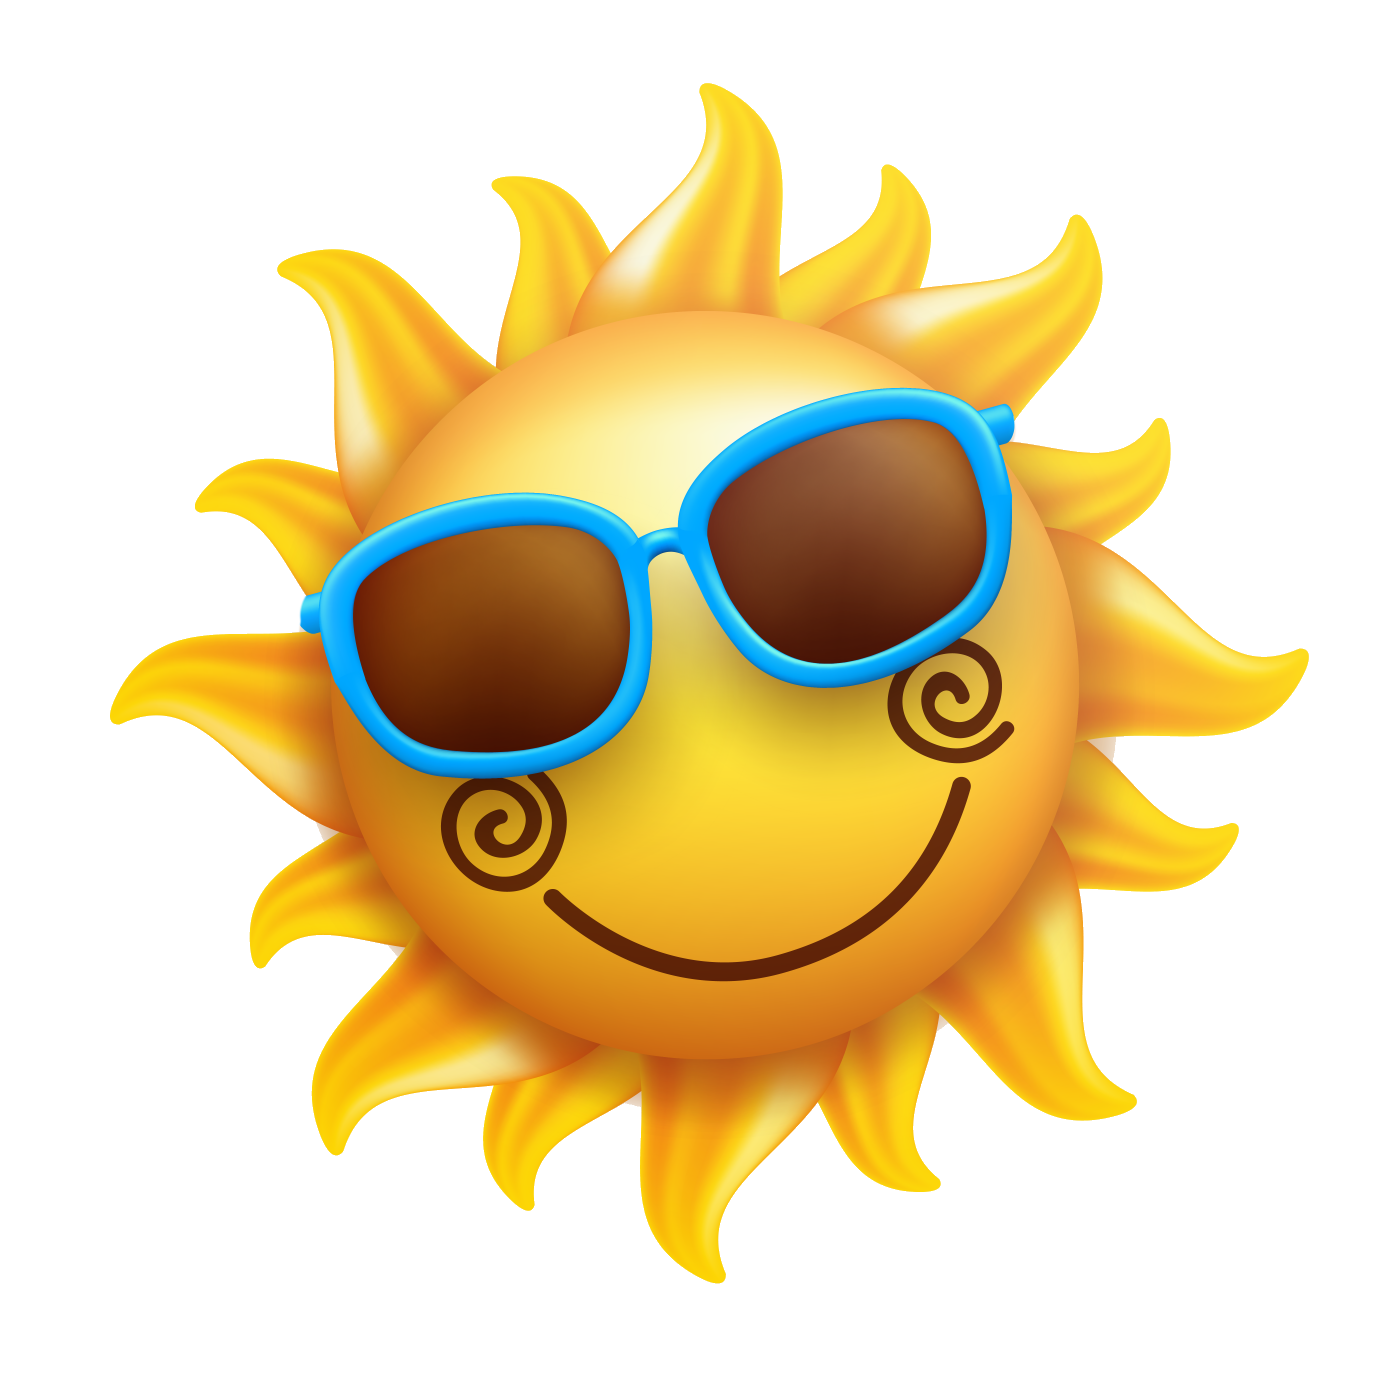 Download Sun Photography Sunglasses Illustration Free HQ Image Clipart ...